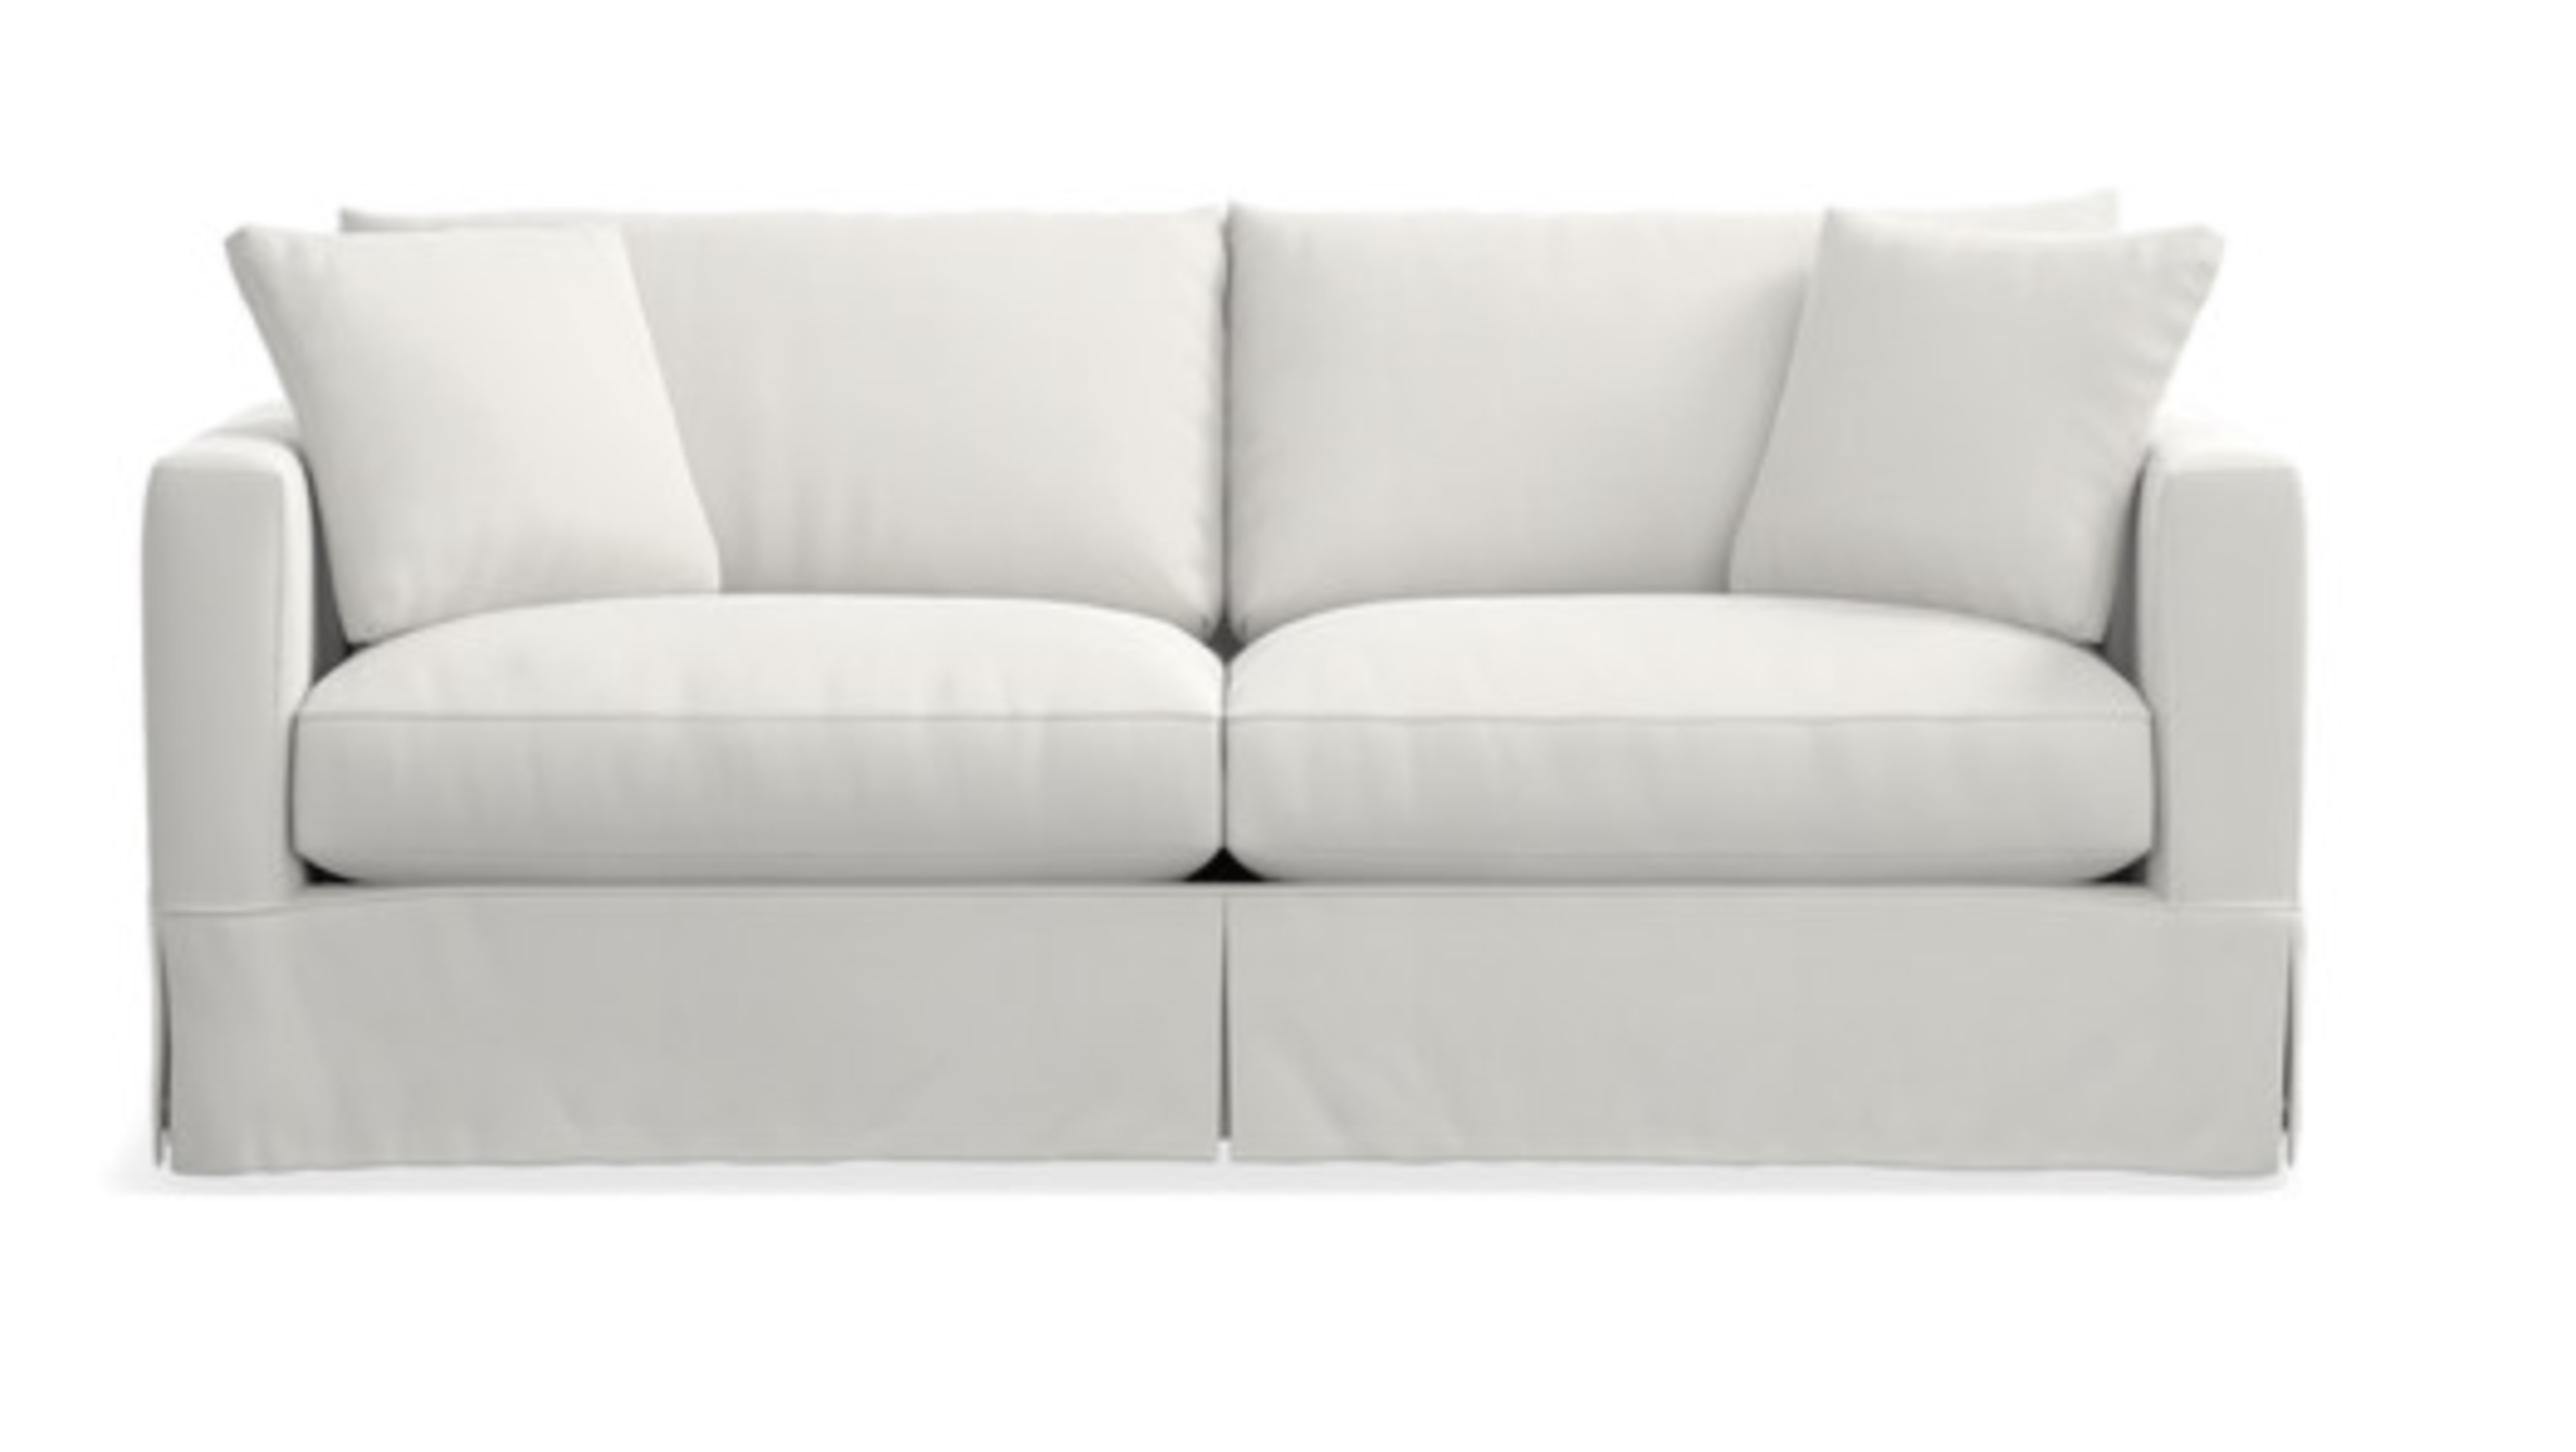 Willow Sofa - Douglas, Lace - Crate and Barrel